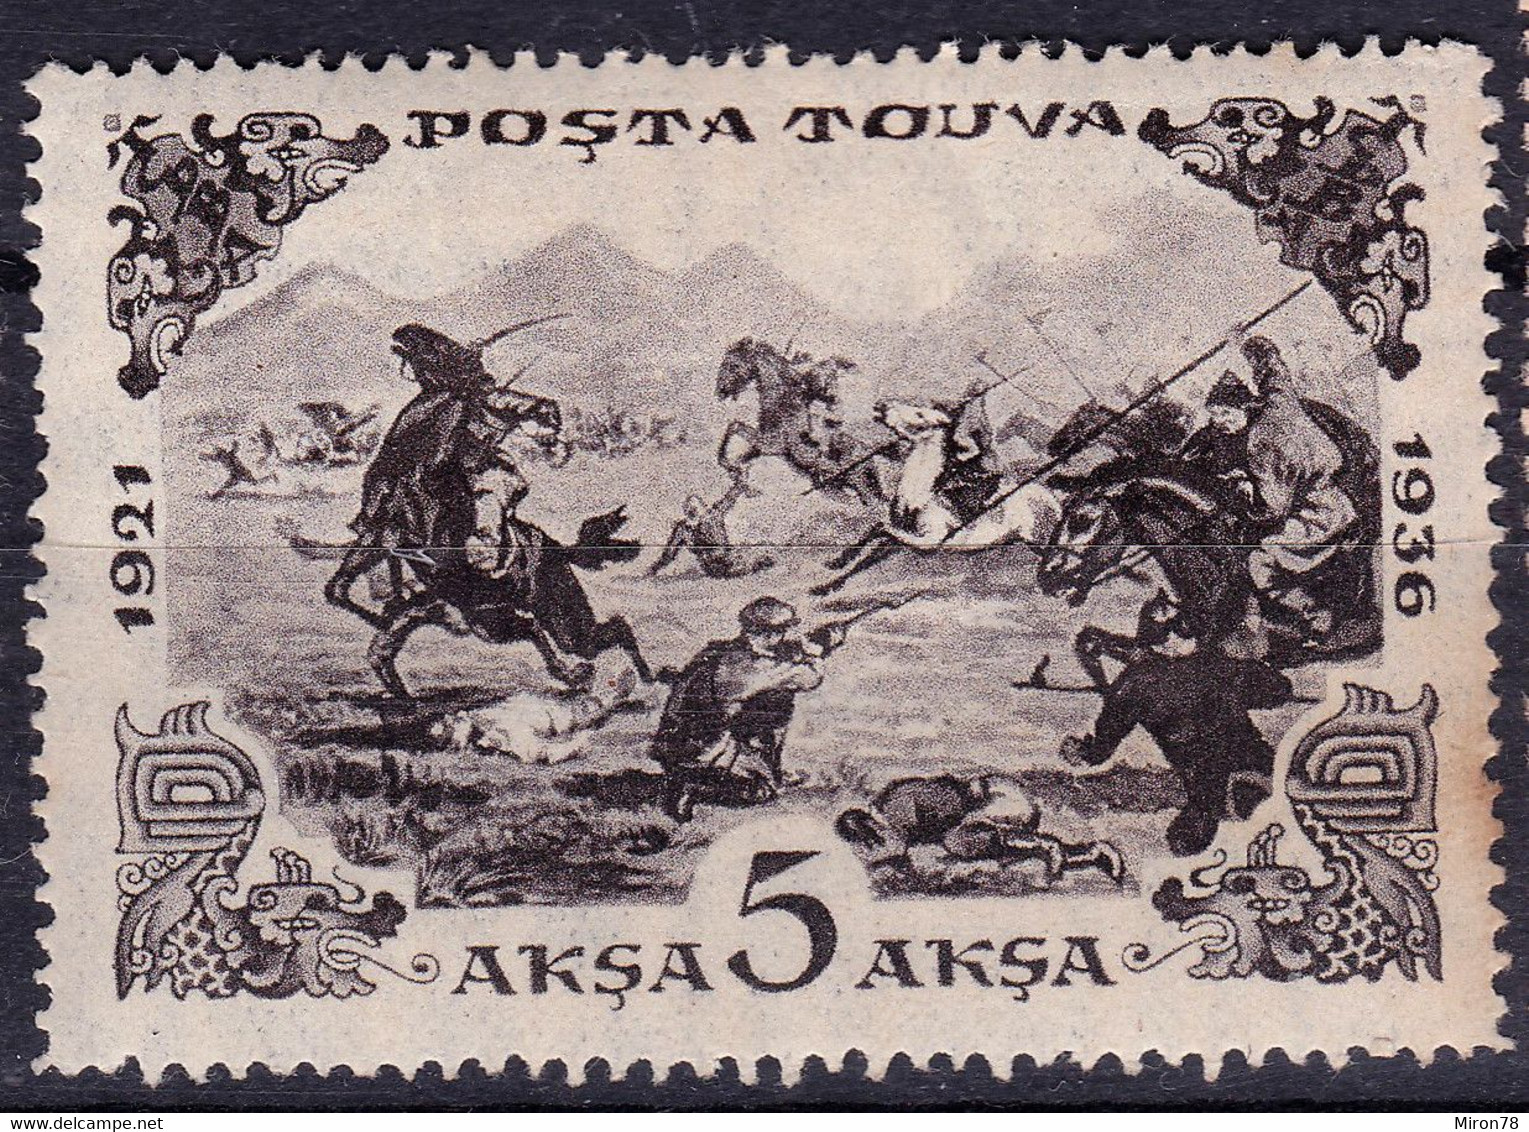 STAMPS TANNU TUVA 1936 MINT MH LOT#30 - Touva